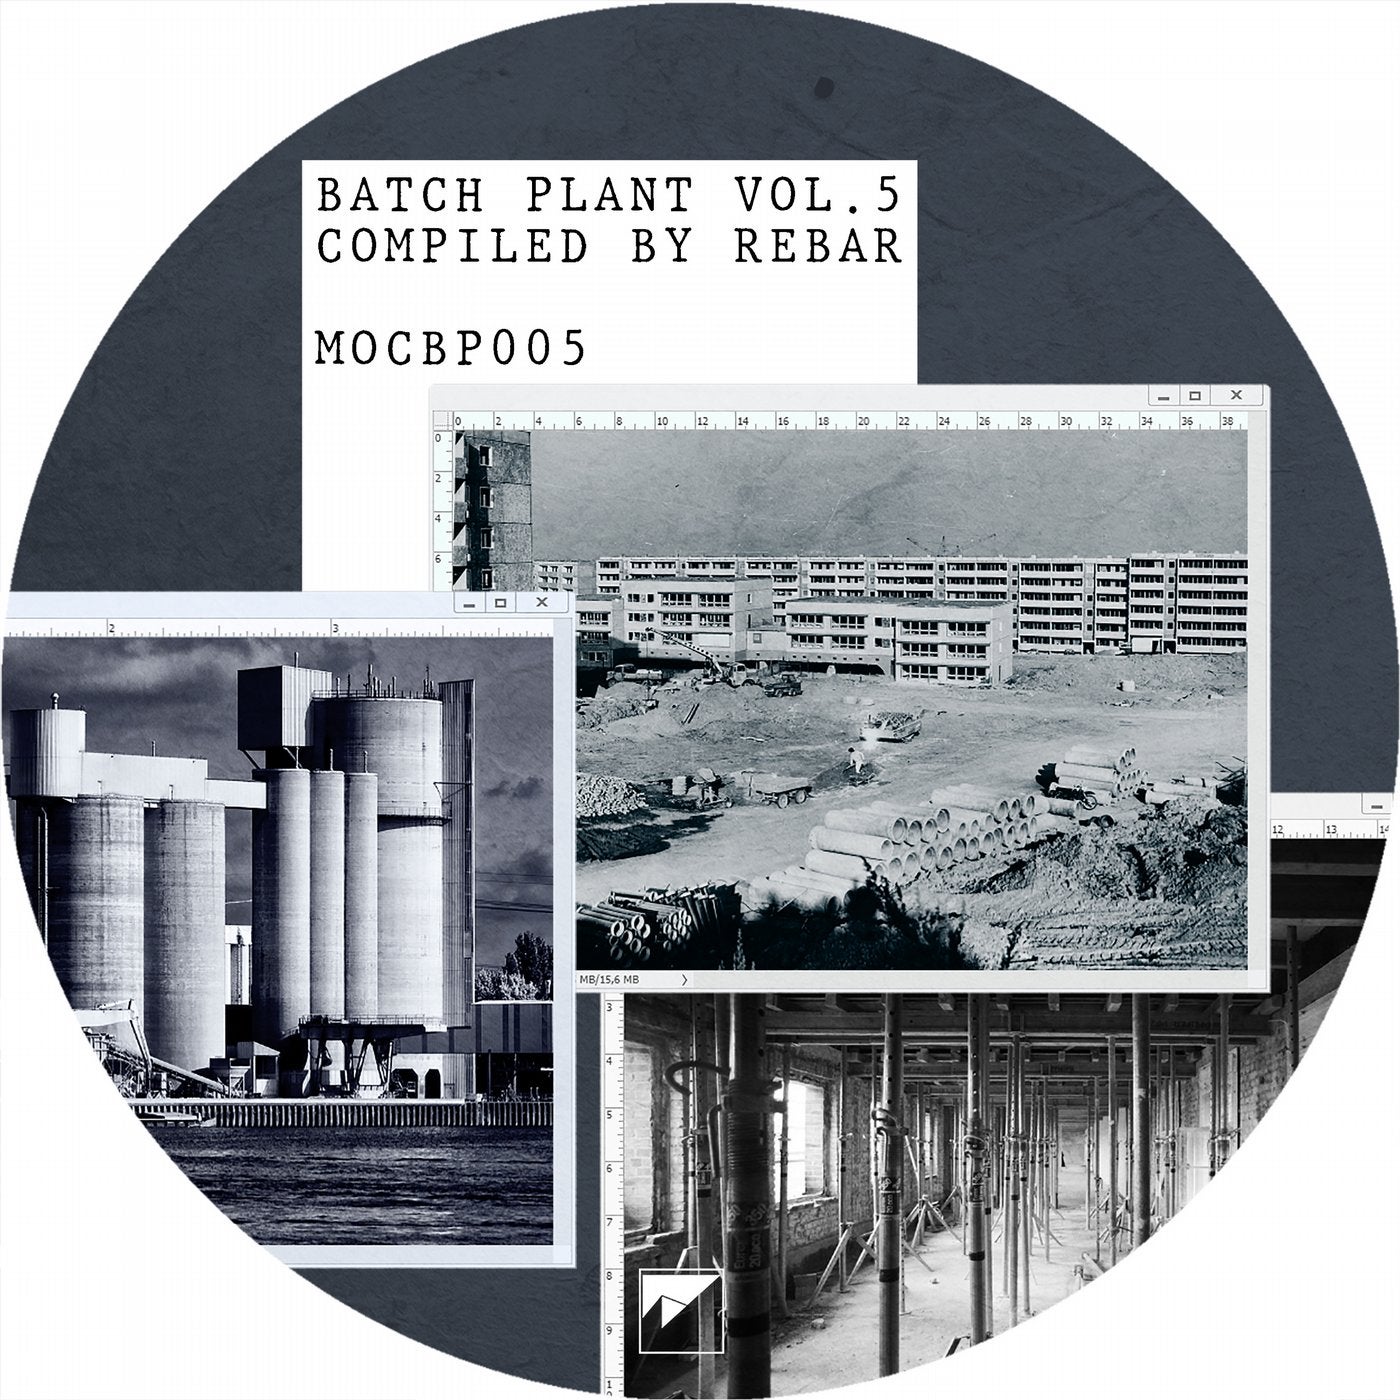 Batch Plant Vol. 5, compiled by Rebar